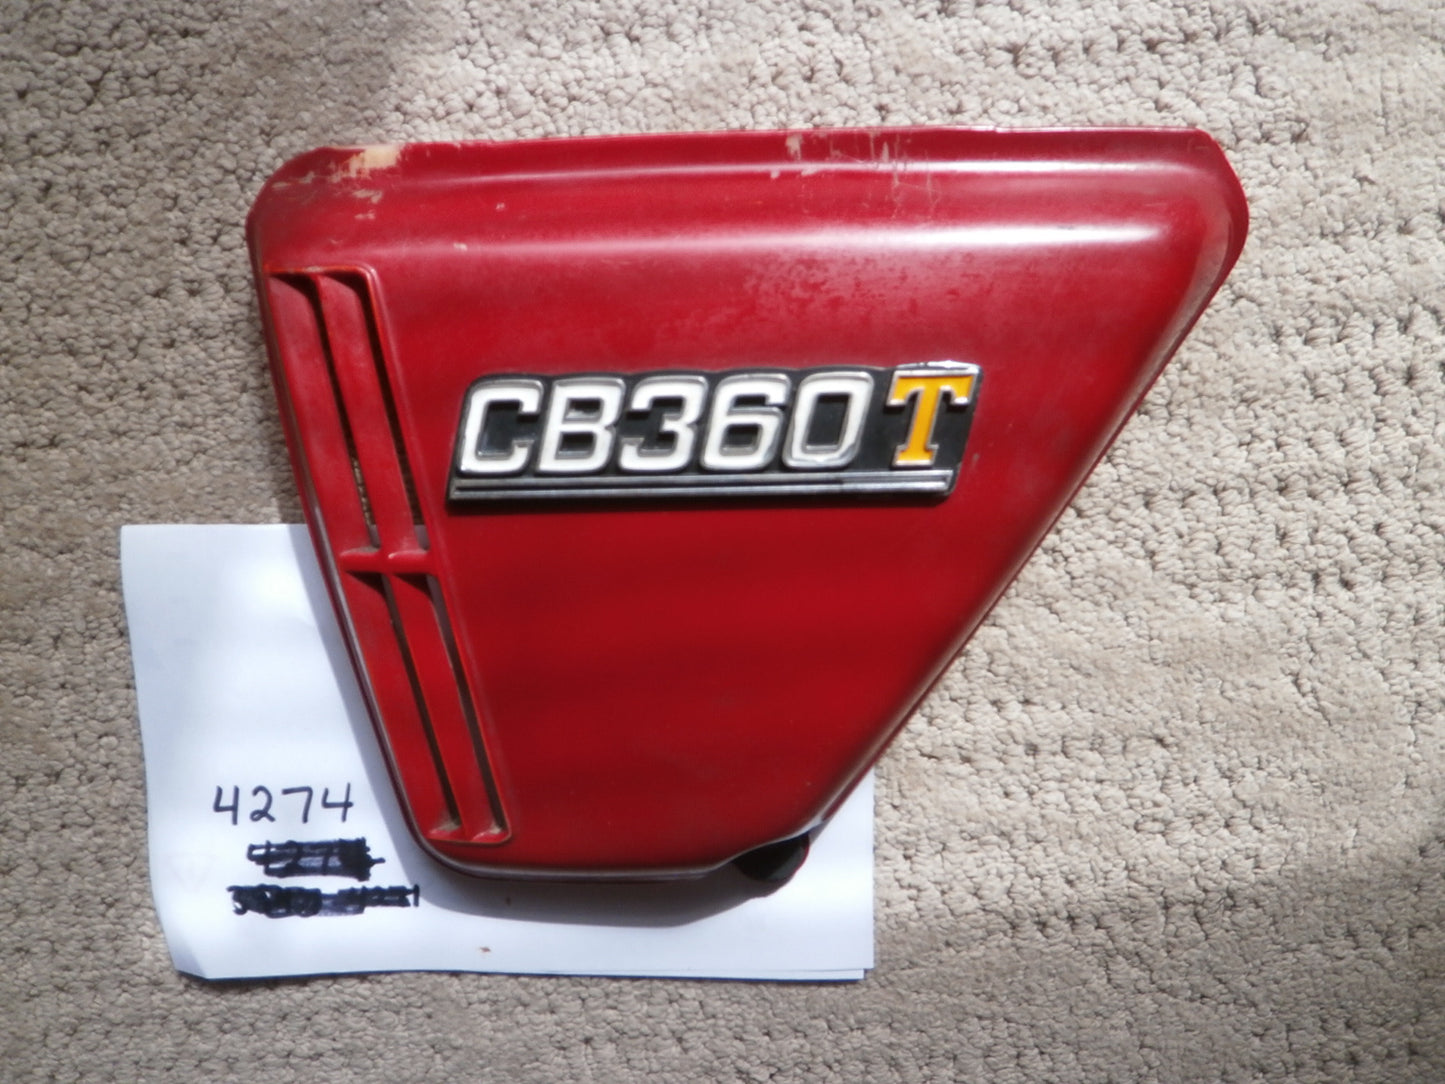 Honda CB360T Left Red Sidecover with badge 4274